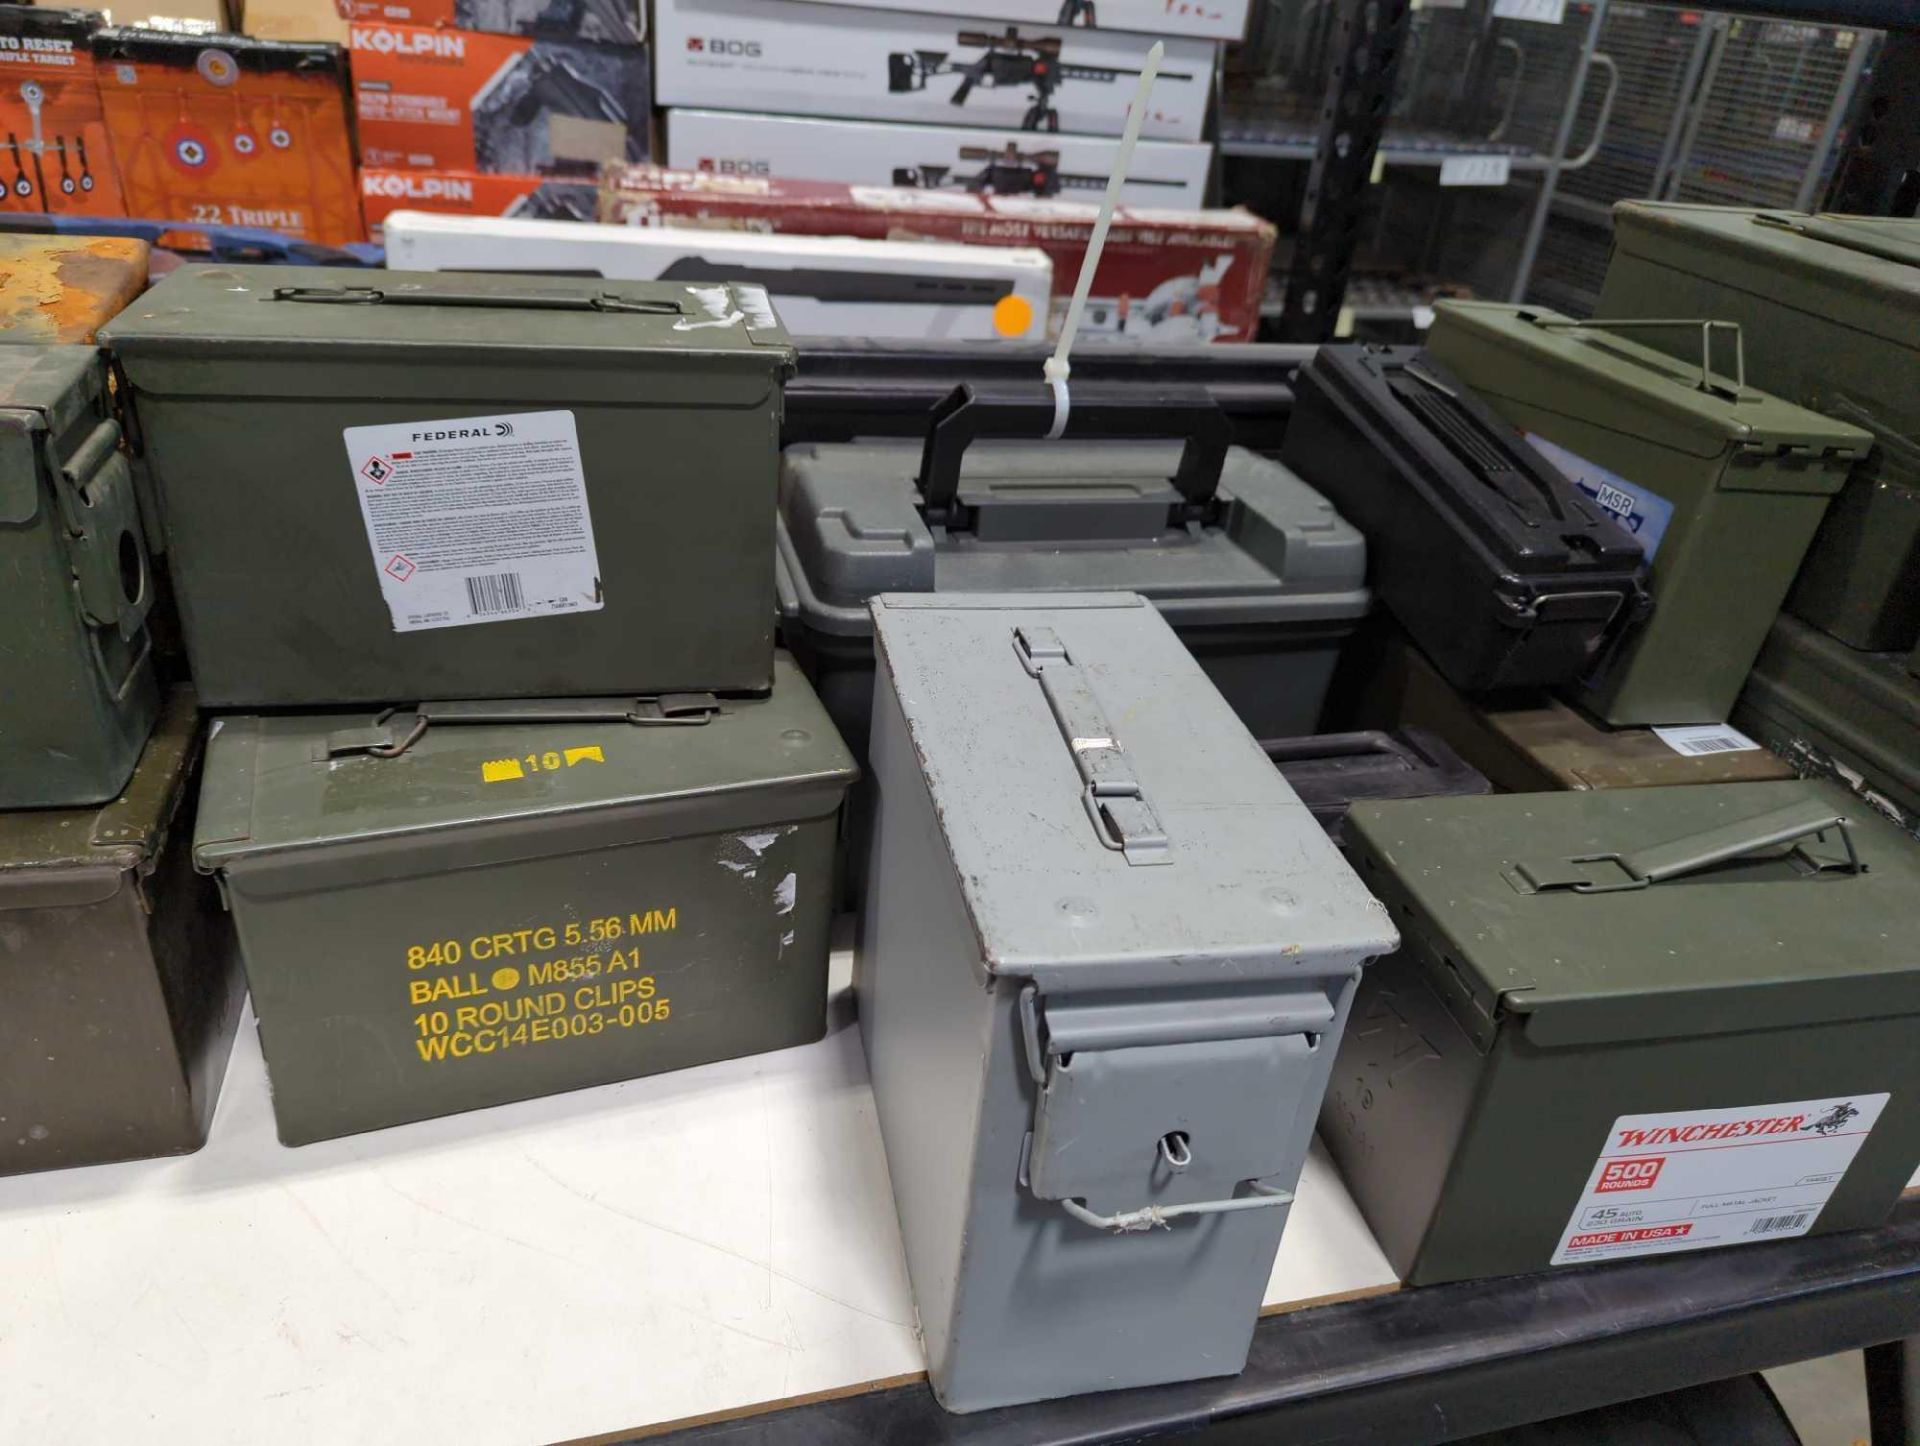 ammo cans and gun cases - Image 3 of 8